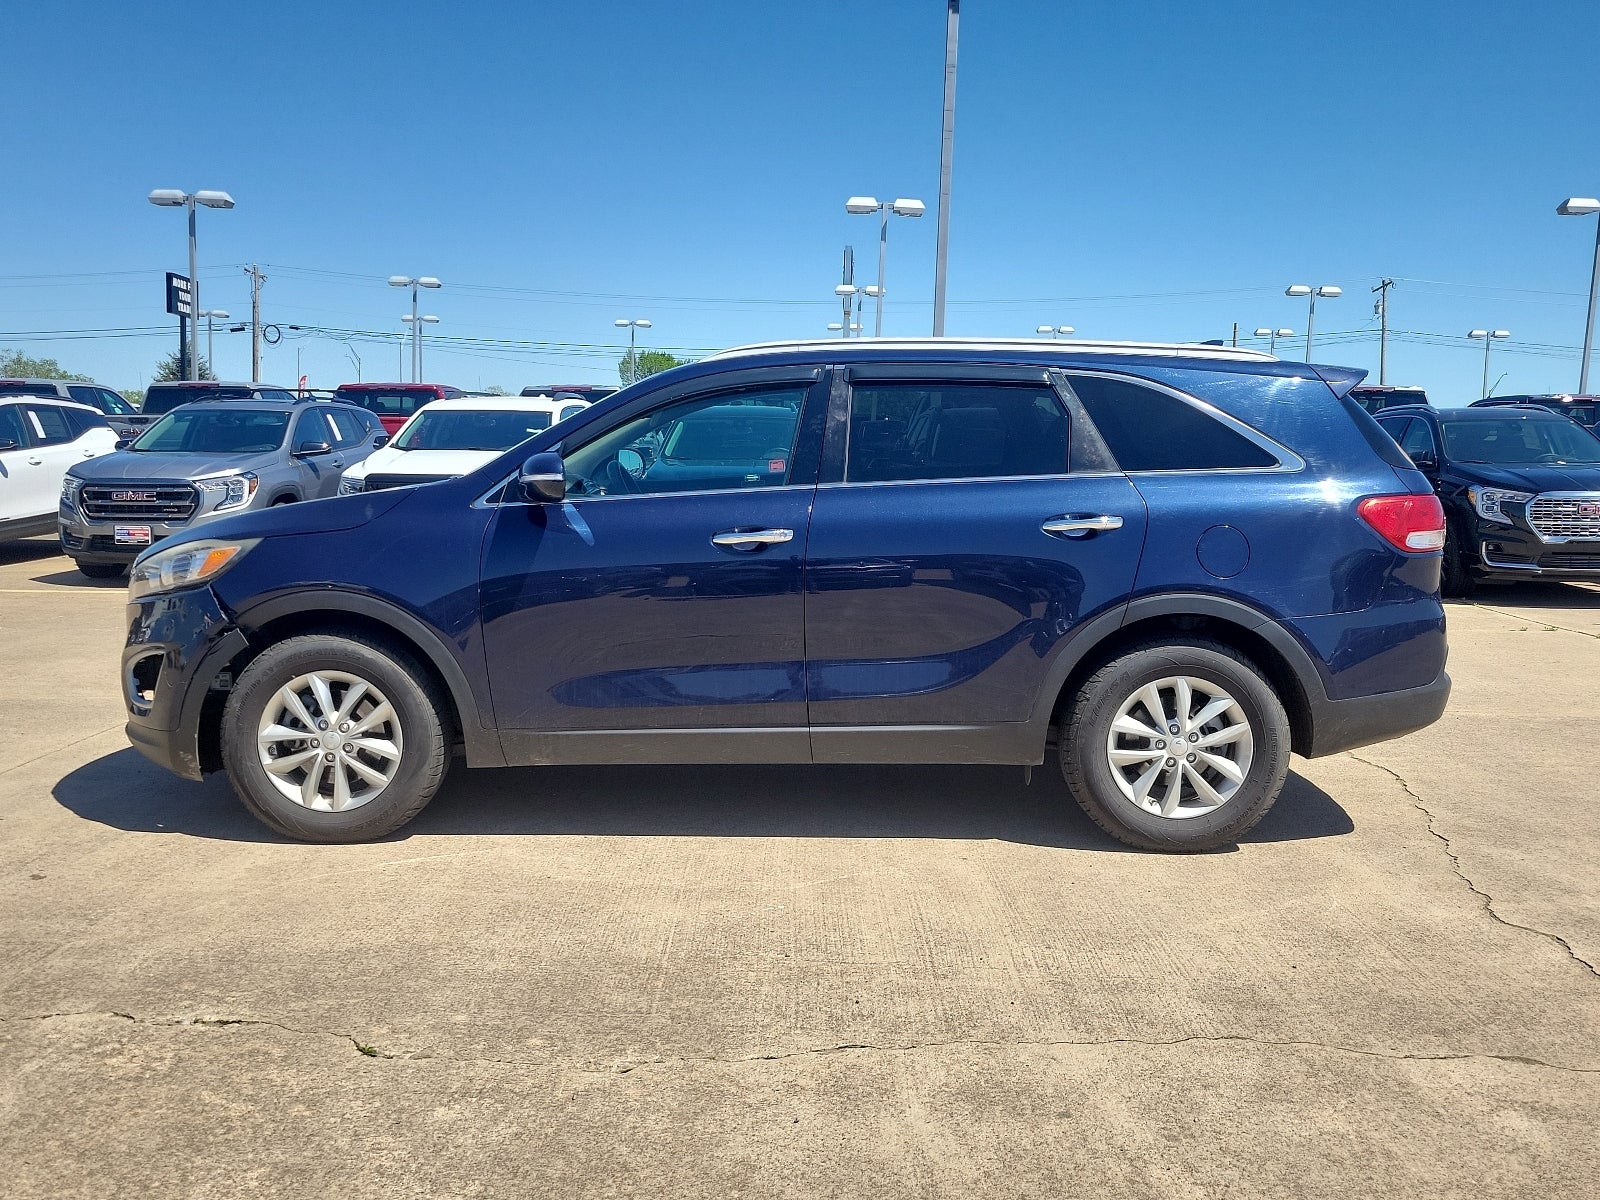 Used 2017 Kia Sorento LX with VIN 5XYPG4A35HG208228 for sale in Fort Smith, AR